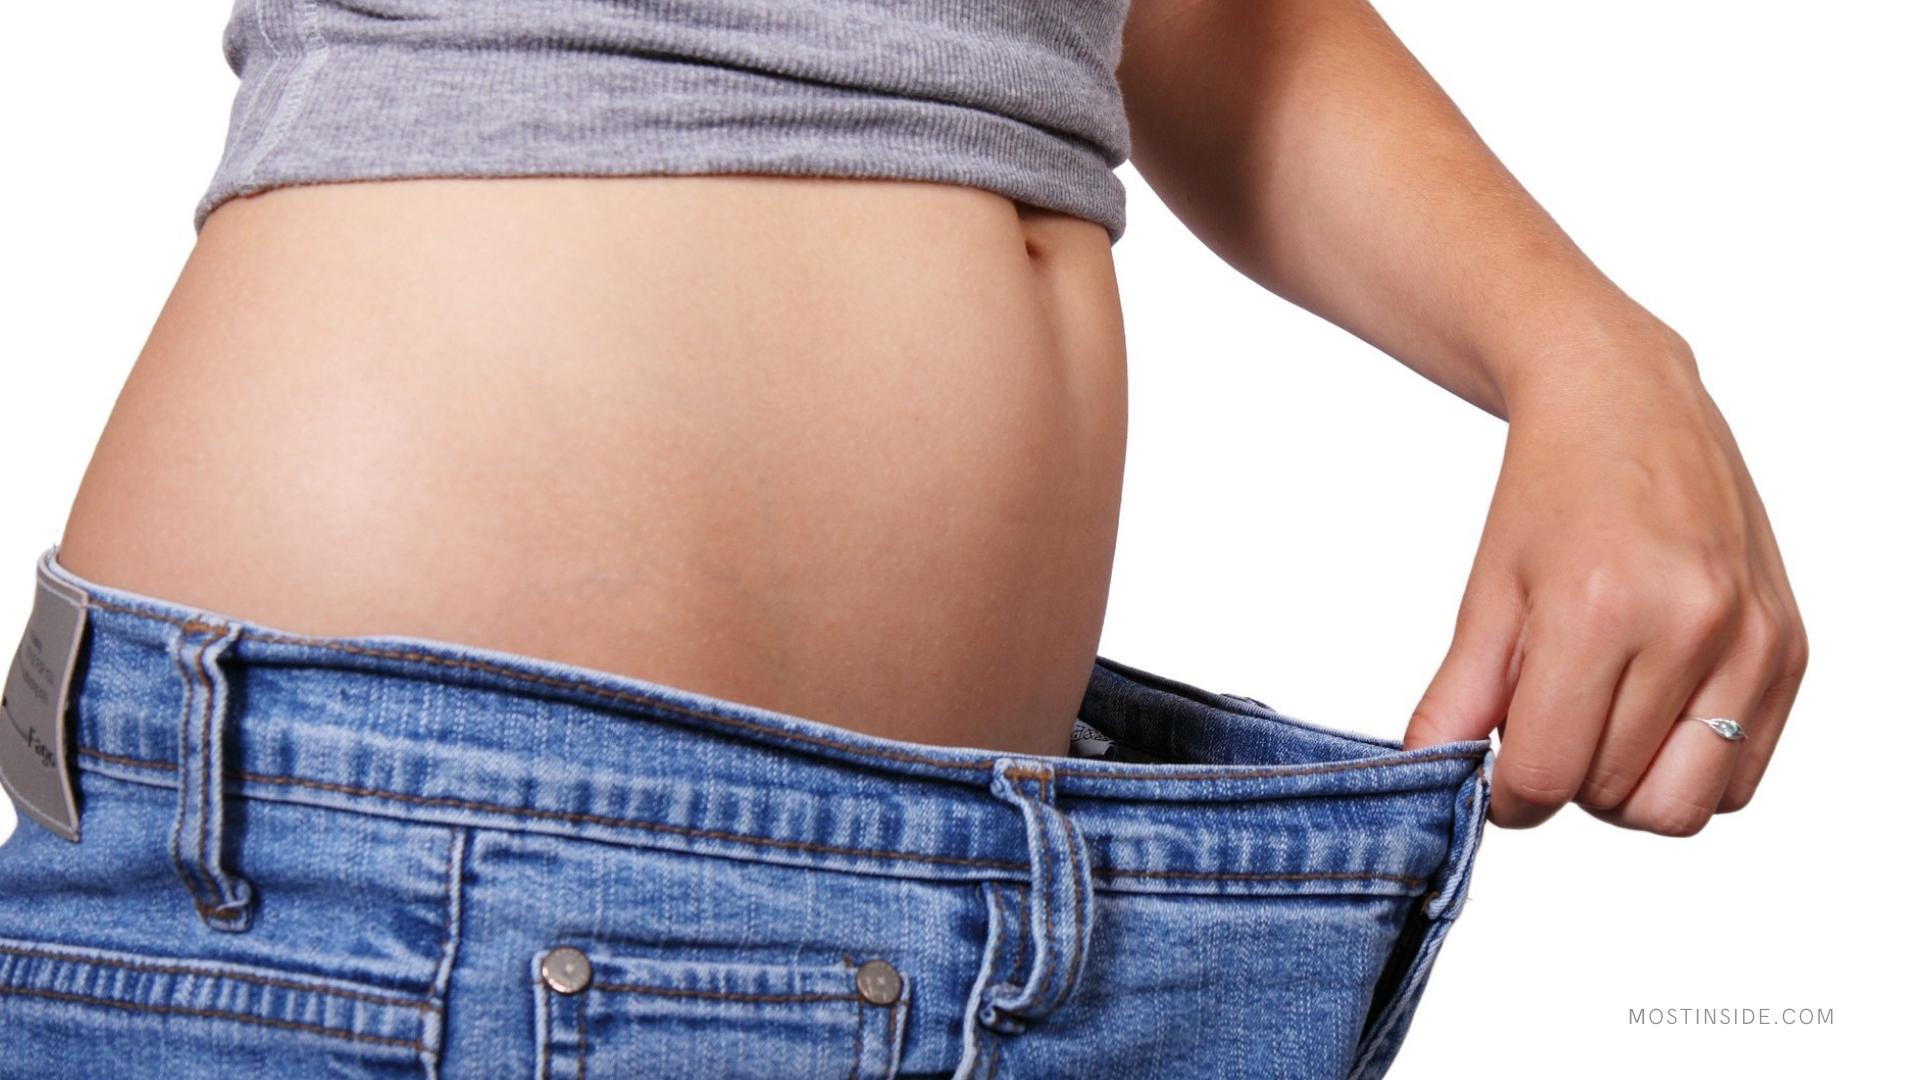 Foods to Avoid to Lose Inches Around the Waist